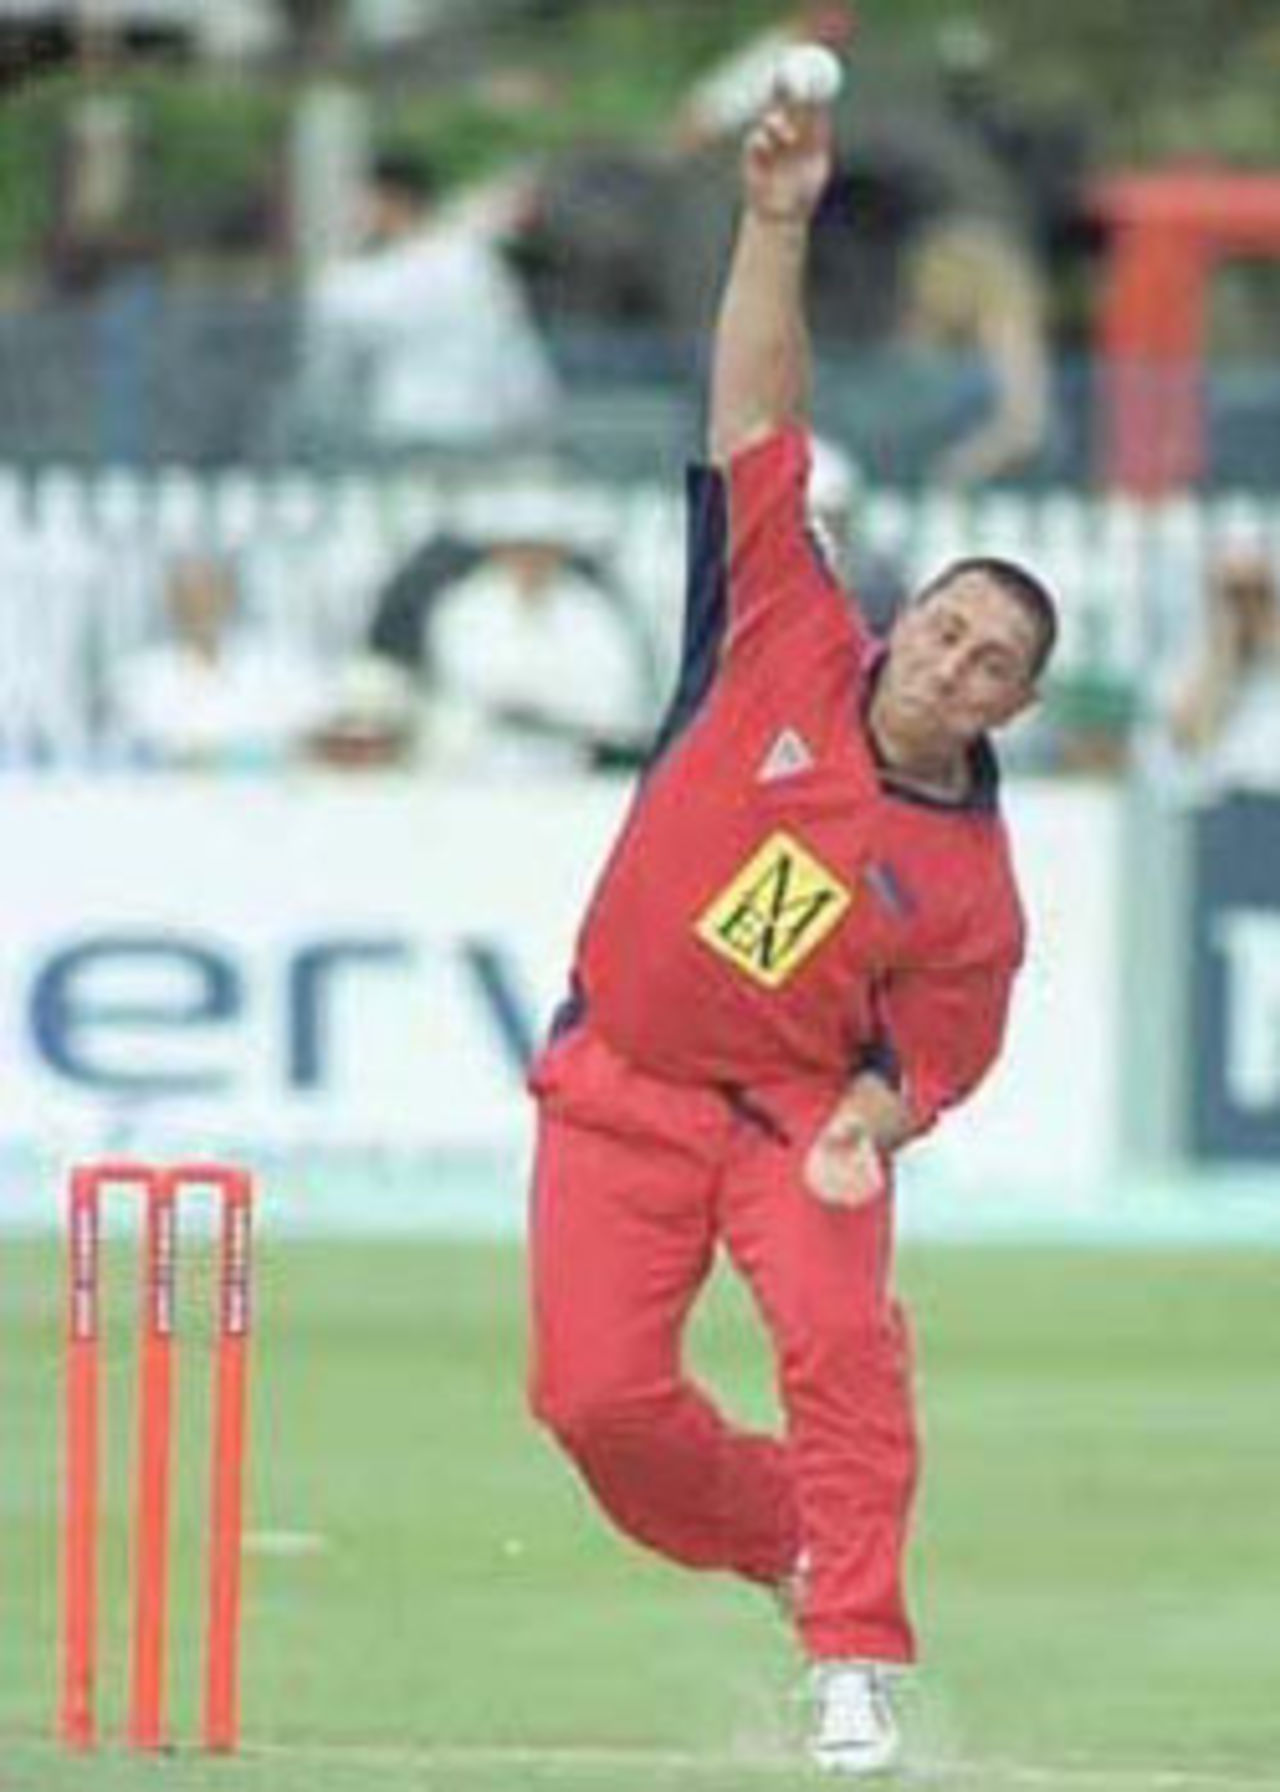 Ian Austin about to release the ball, National League Division One, 2000, Sussex v Lancashire, New County Ground, Hove, Brighton, 07 August 2000.